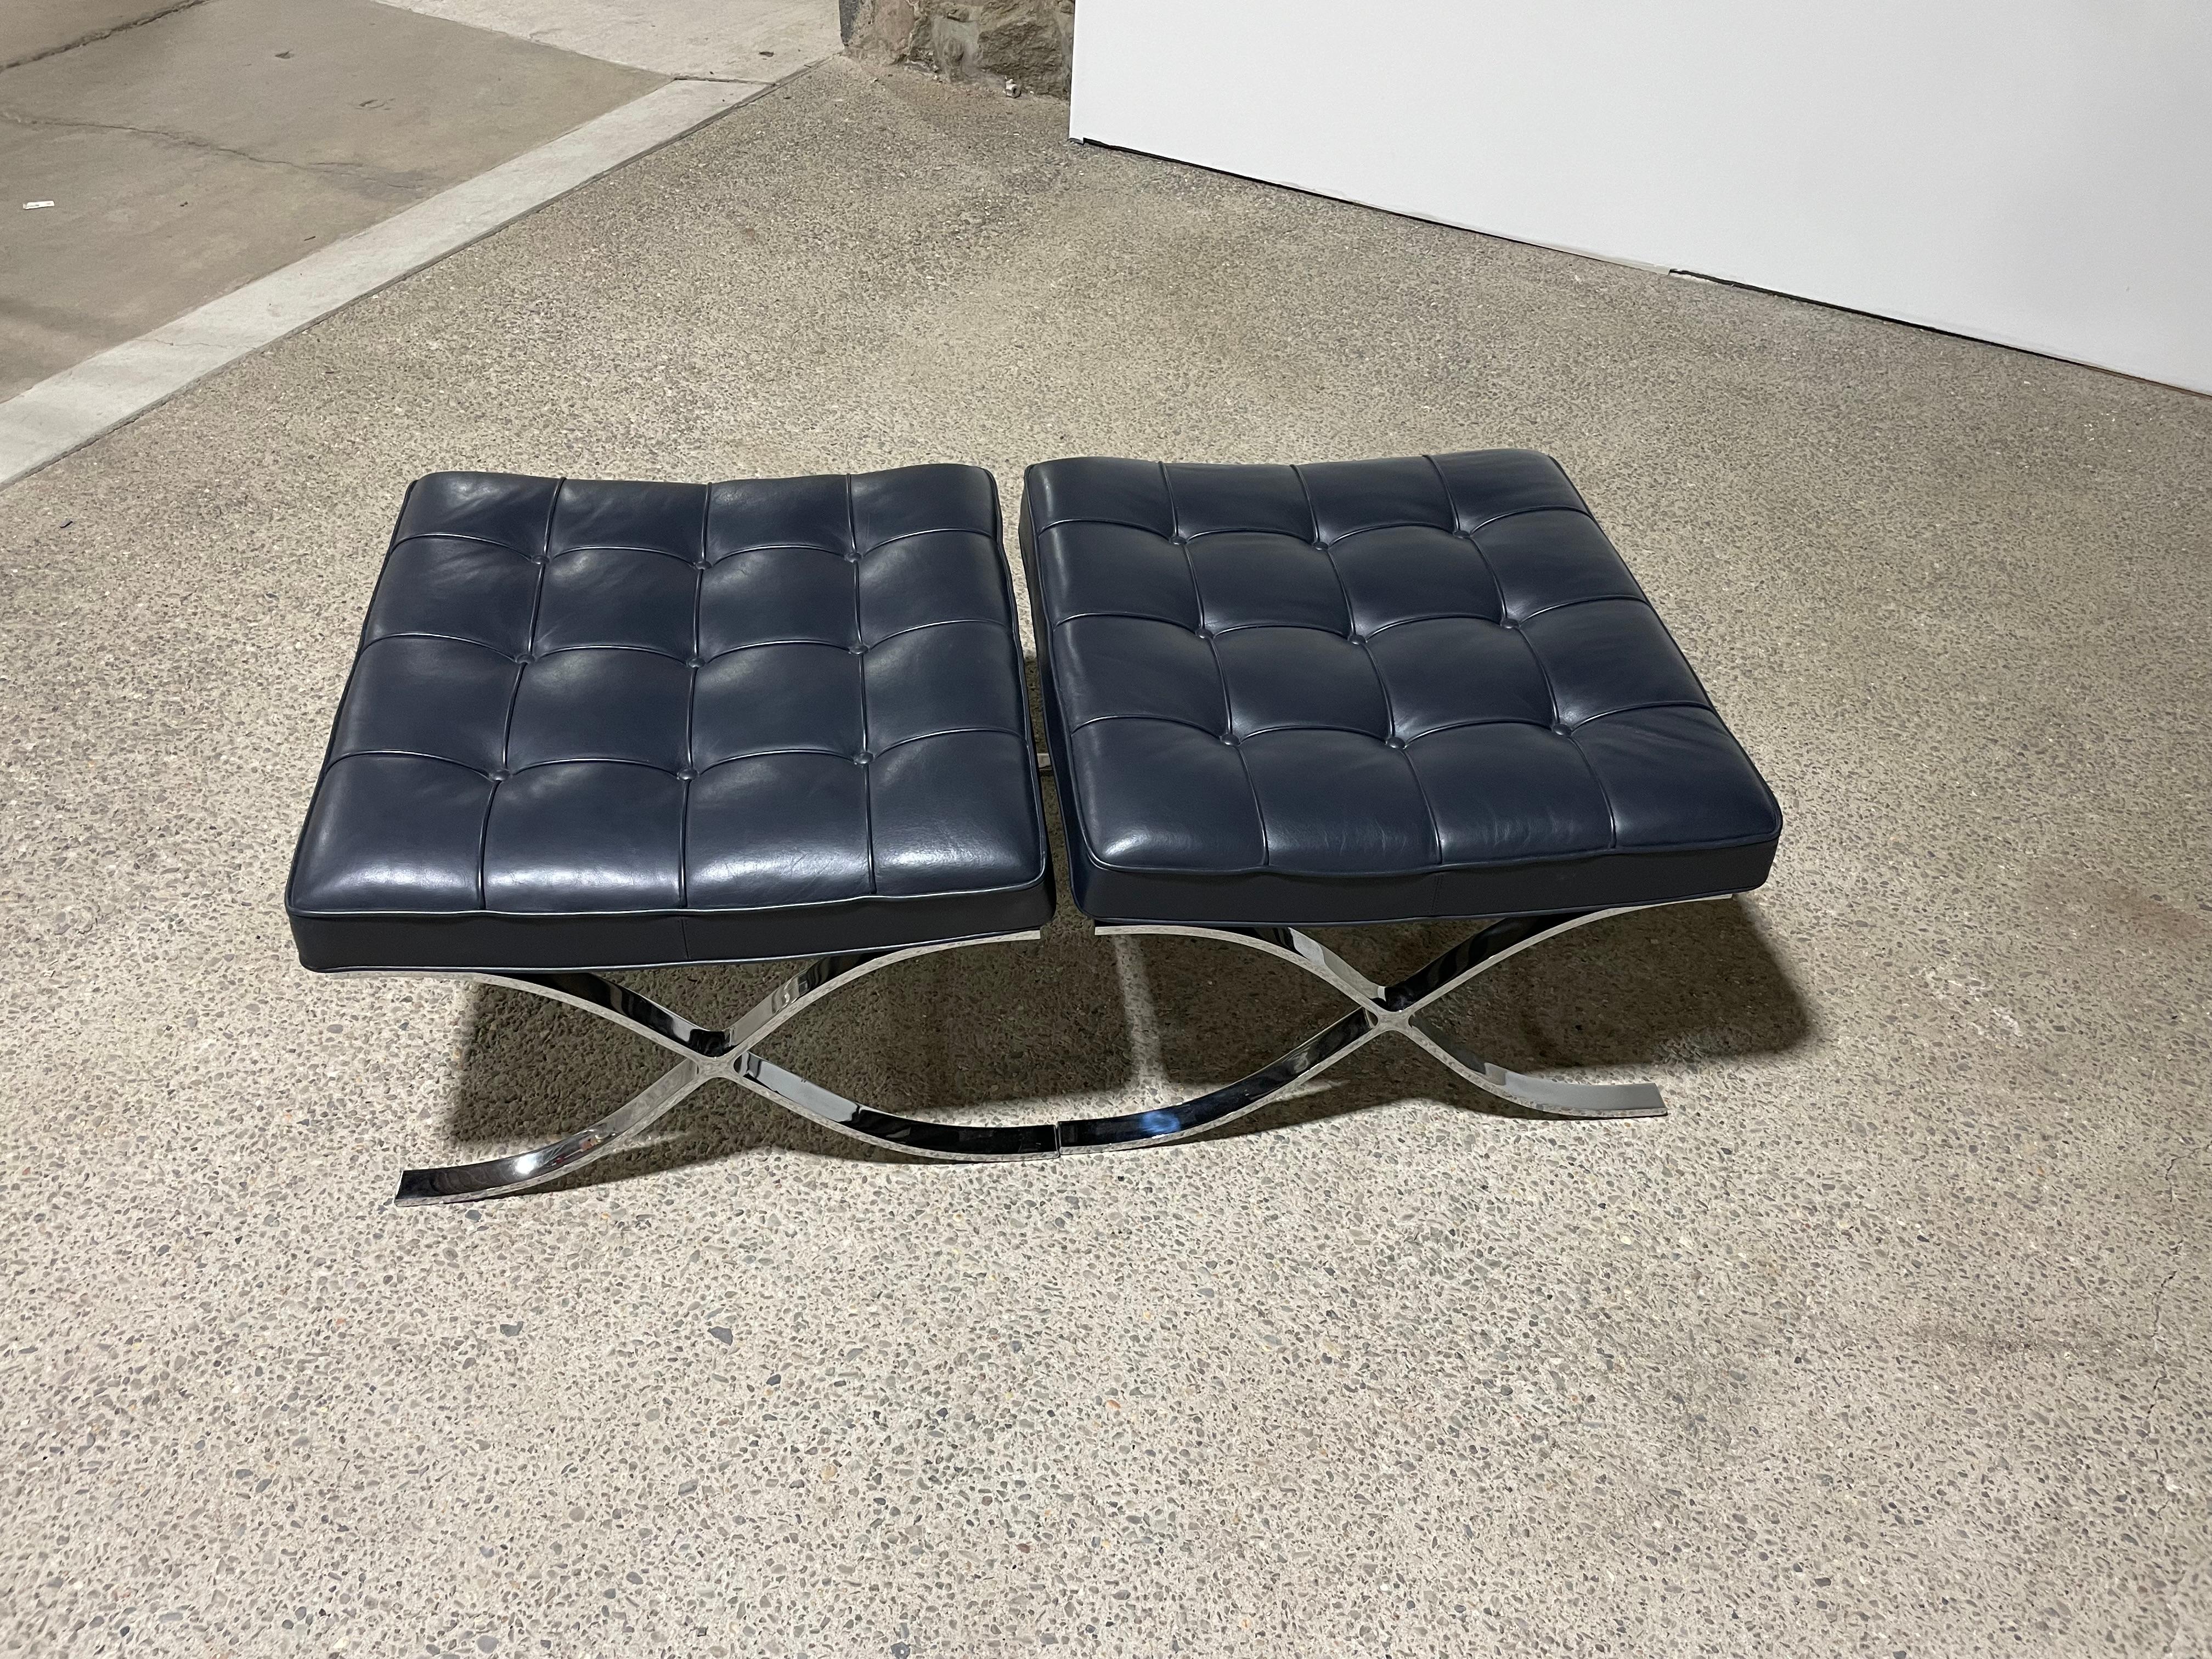 Fantastic pair of authentic Knoll. Barcelona ottomans with engraving on leg and tag underneath the seat. 

The pair are matching dark blue leather. It is likely that the leather type is Sabrina, Marine Blue, with a retail price of over $5000 per